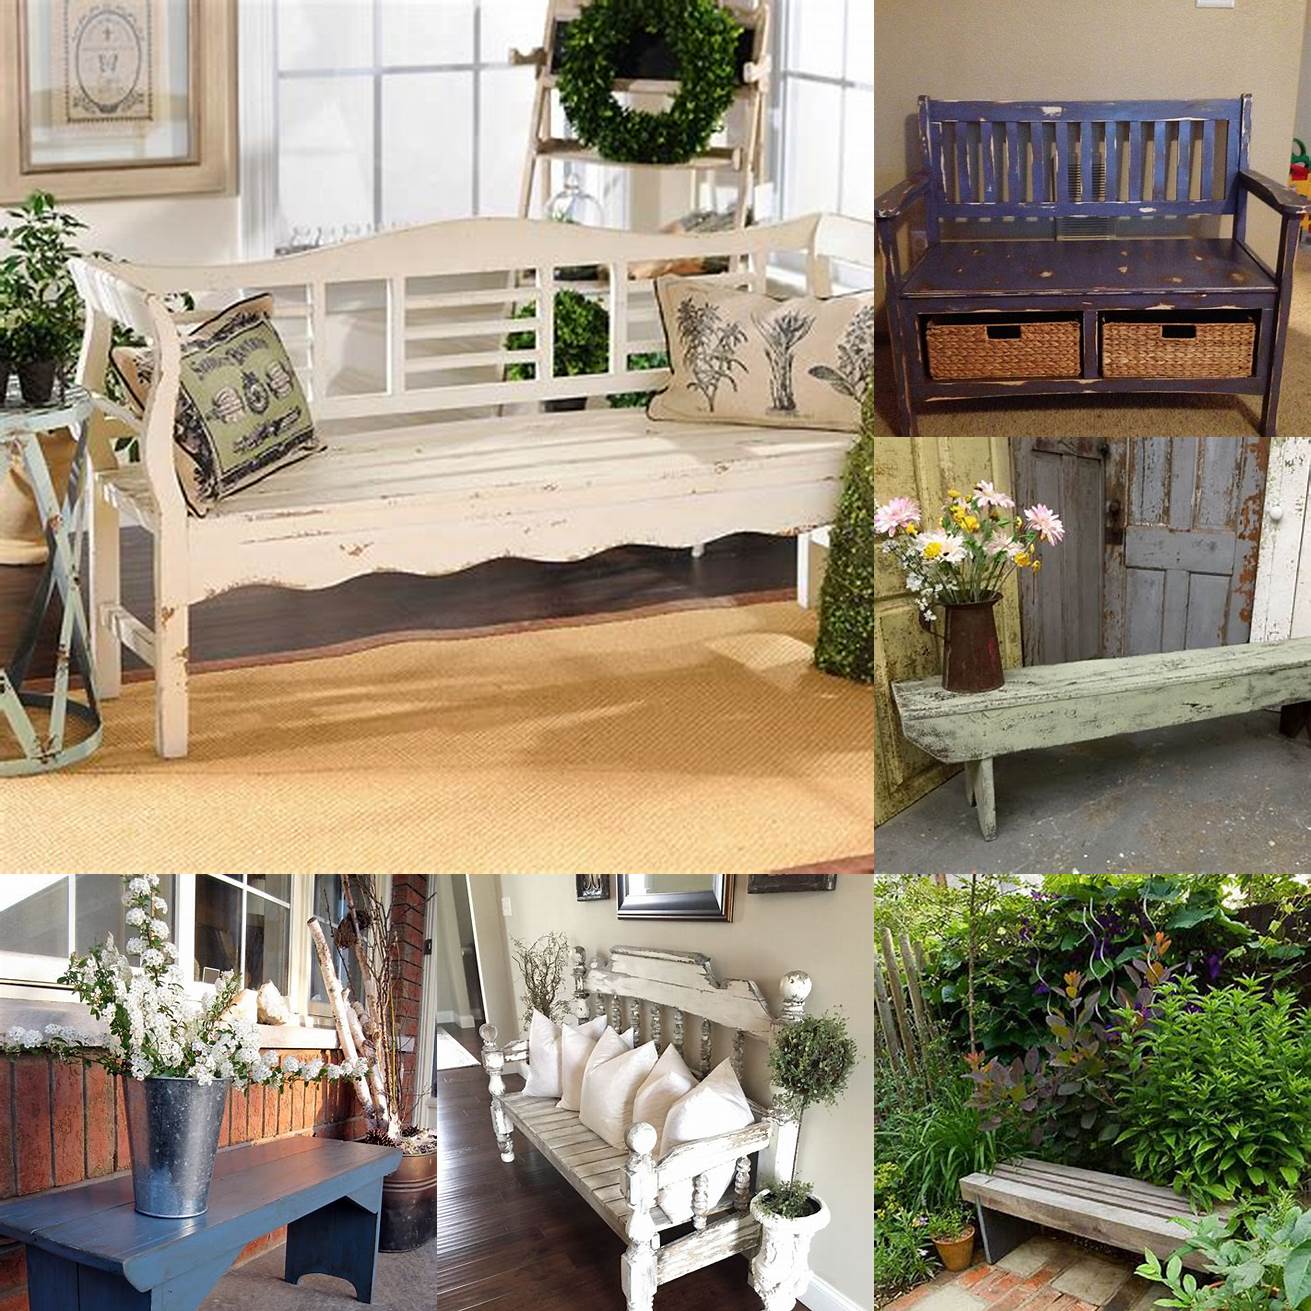 A distressed bench used to create a cozy seating area or display favorite flowers and plants